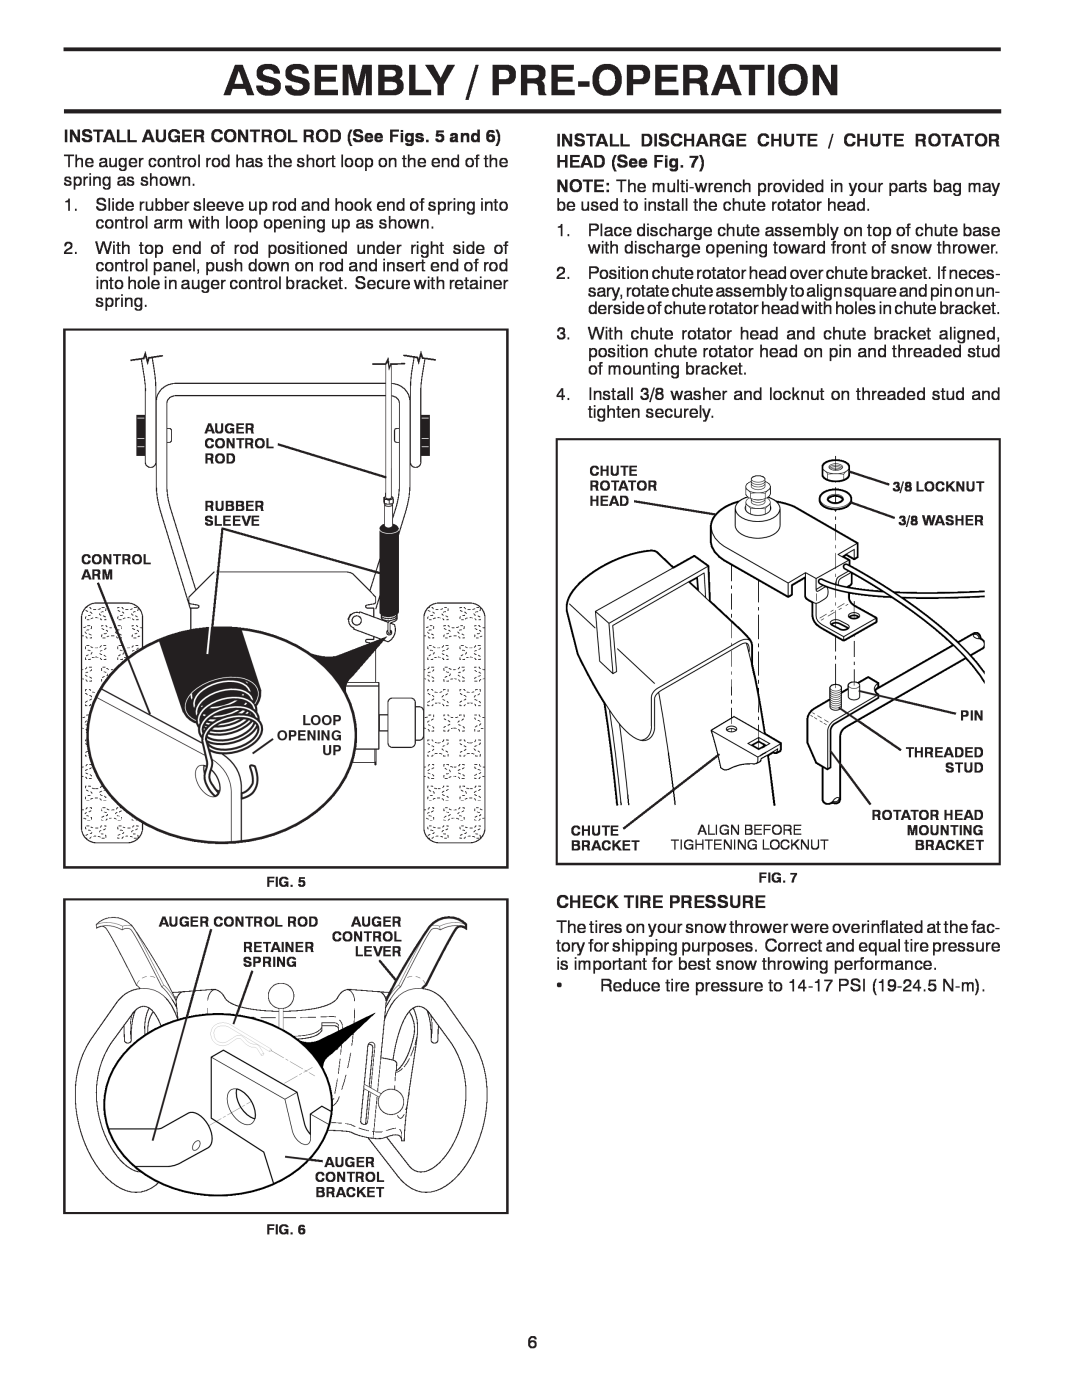 Poulan 96194000503 owner manual Assembly / Pre-Operation, INSTALL AUGER CONTROL ROD See Figs. 5 and, Check Tire Pressure 